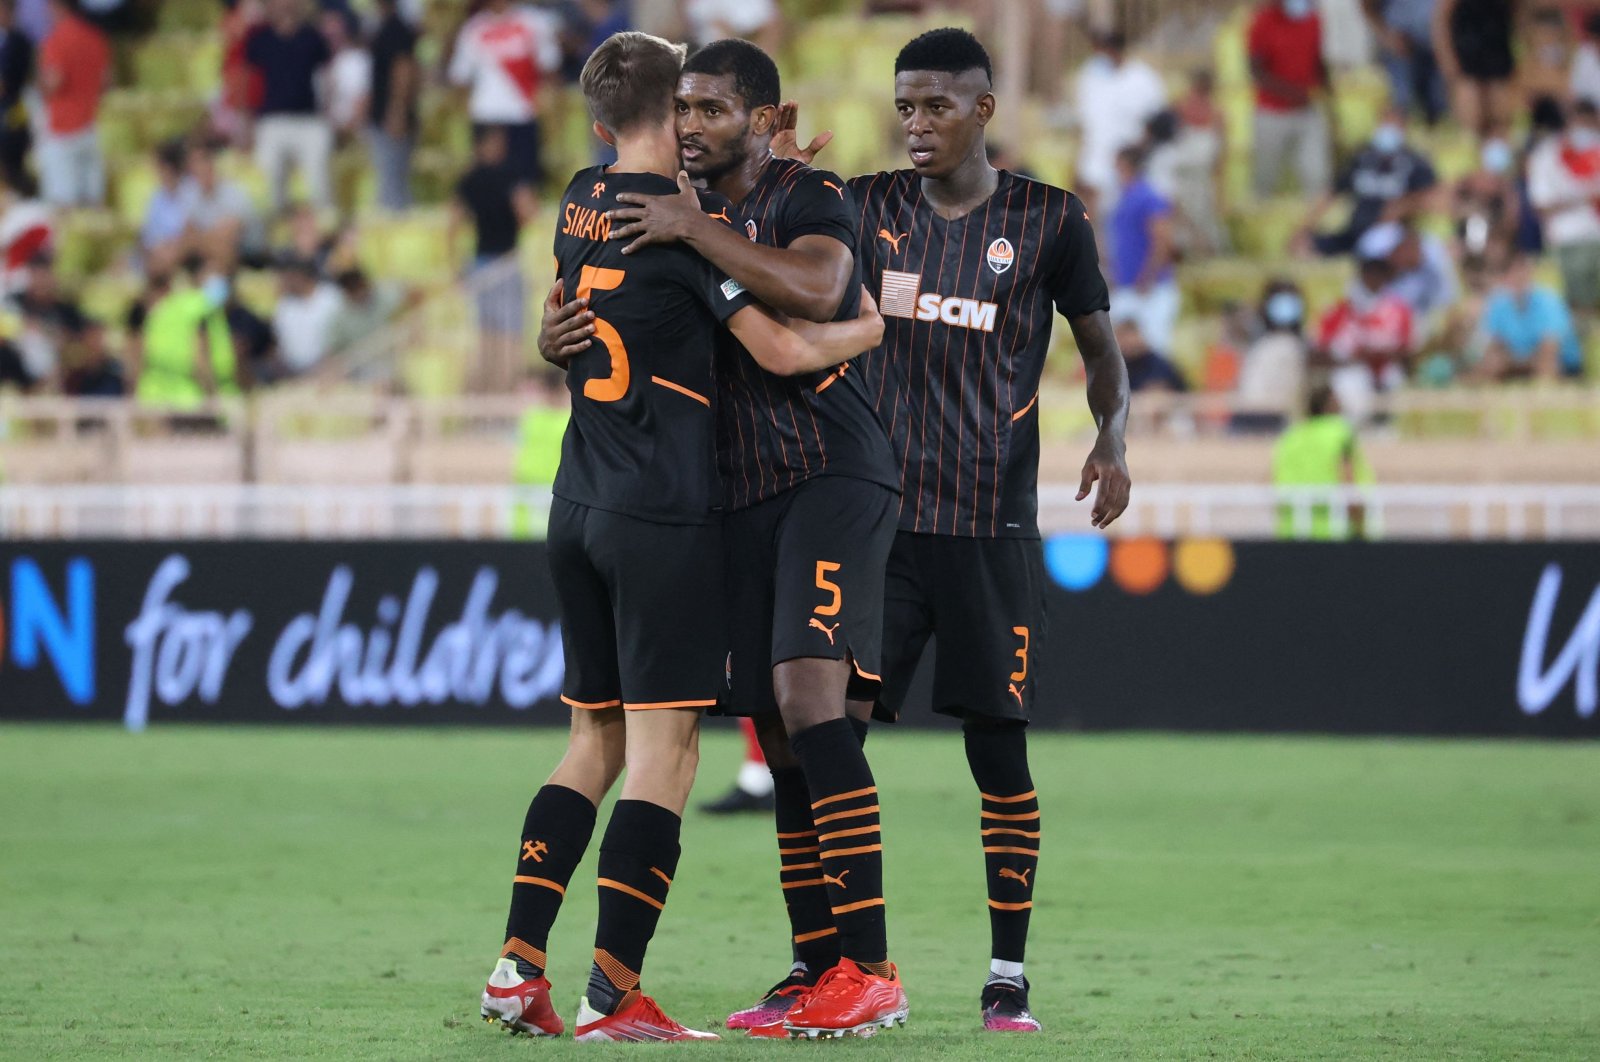 Shakhtar Donetsk's players react at the end of their UEFA Champions League playoff win against Monaco at "Louis II" stadium in Monaco, Aug. 17, 2021. (AFP Photo)